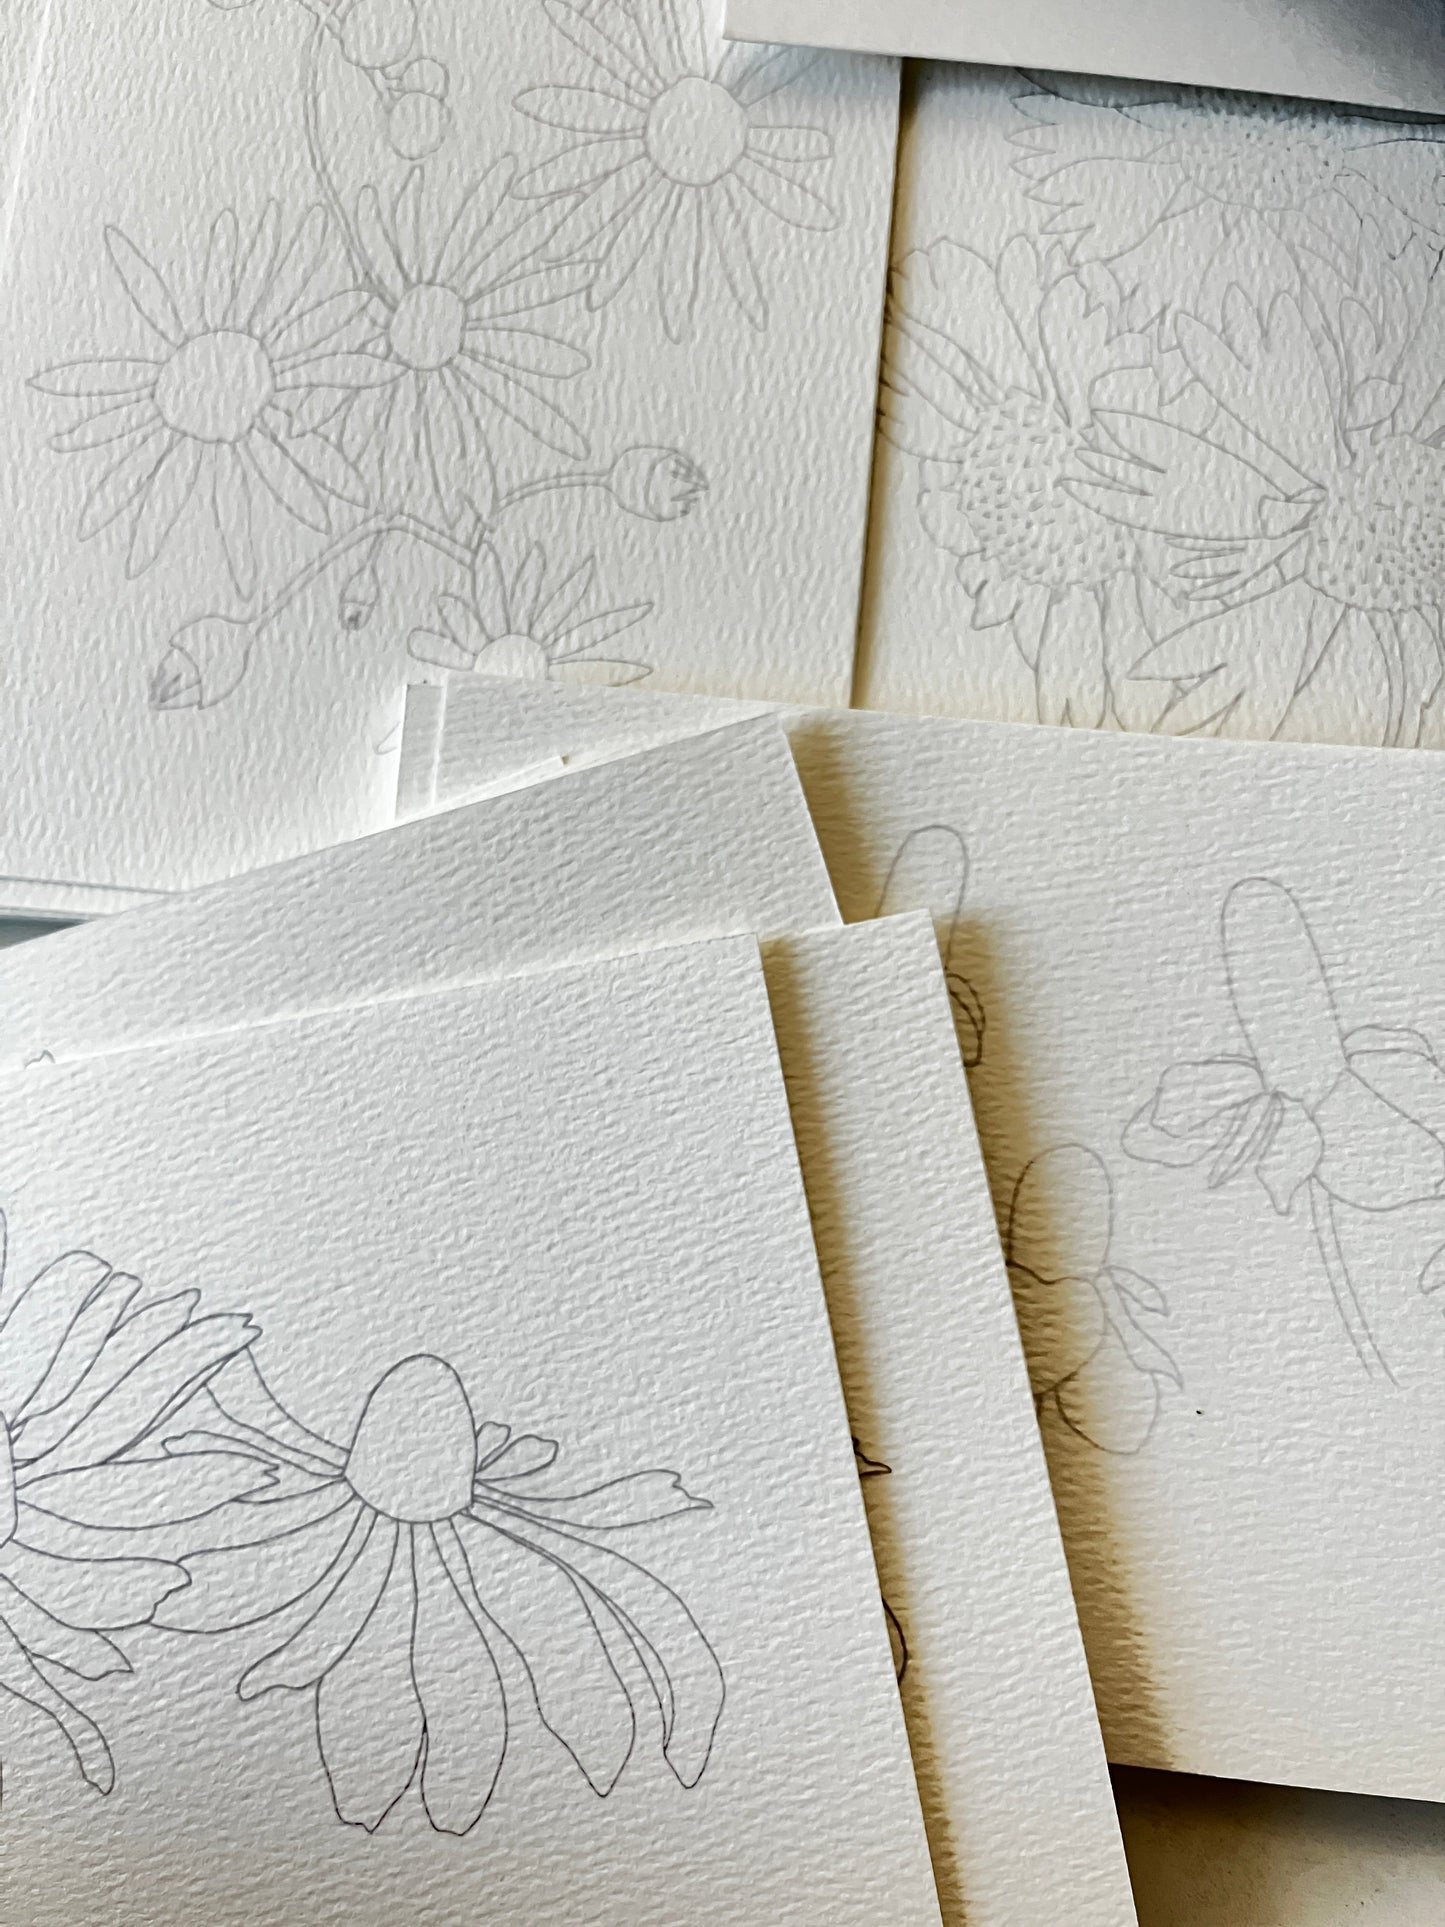 Ready-to-Paint Watercolor Pages: Classic Florals